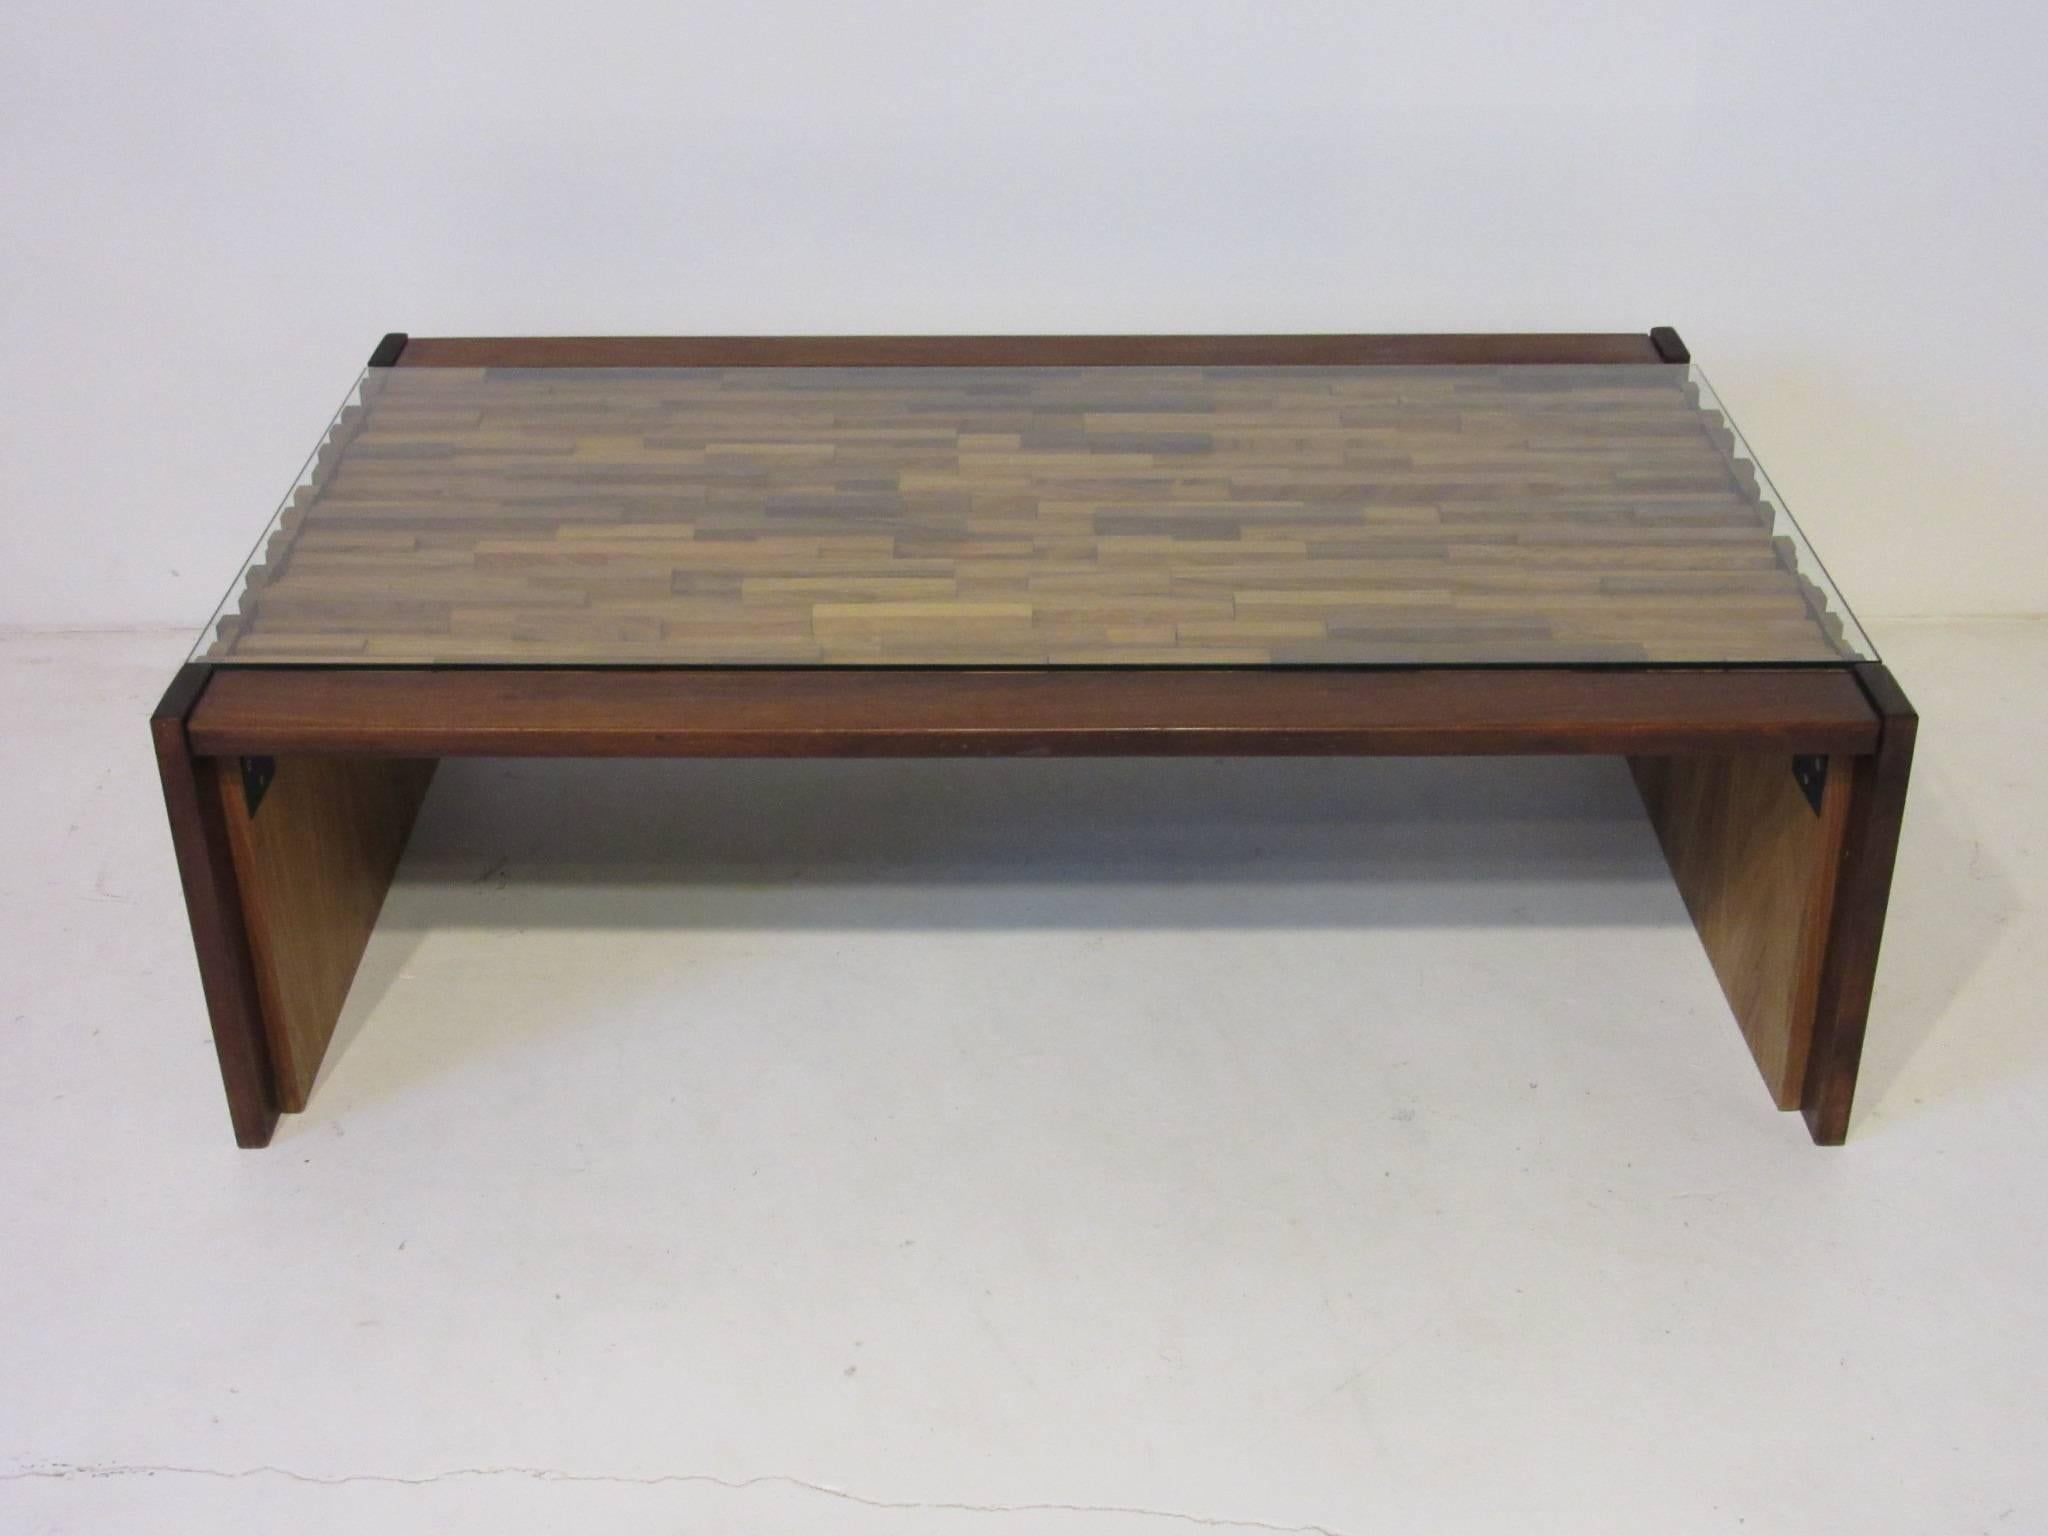 A well constructed rich textured coffee table with form fitted pieces of rosewood topped with glass, also made with locking braces for folding flat. Designed by the noted artist Percival Lafer one of the top Brazilian furniture markers, Lafer MP